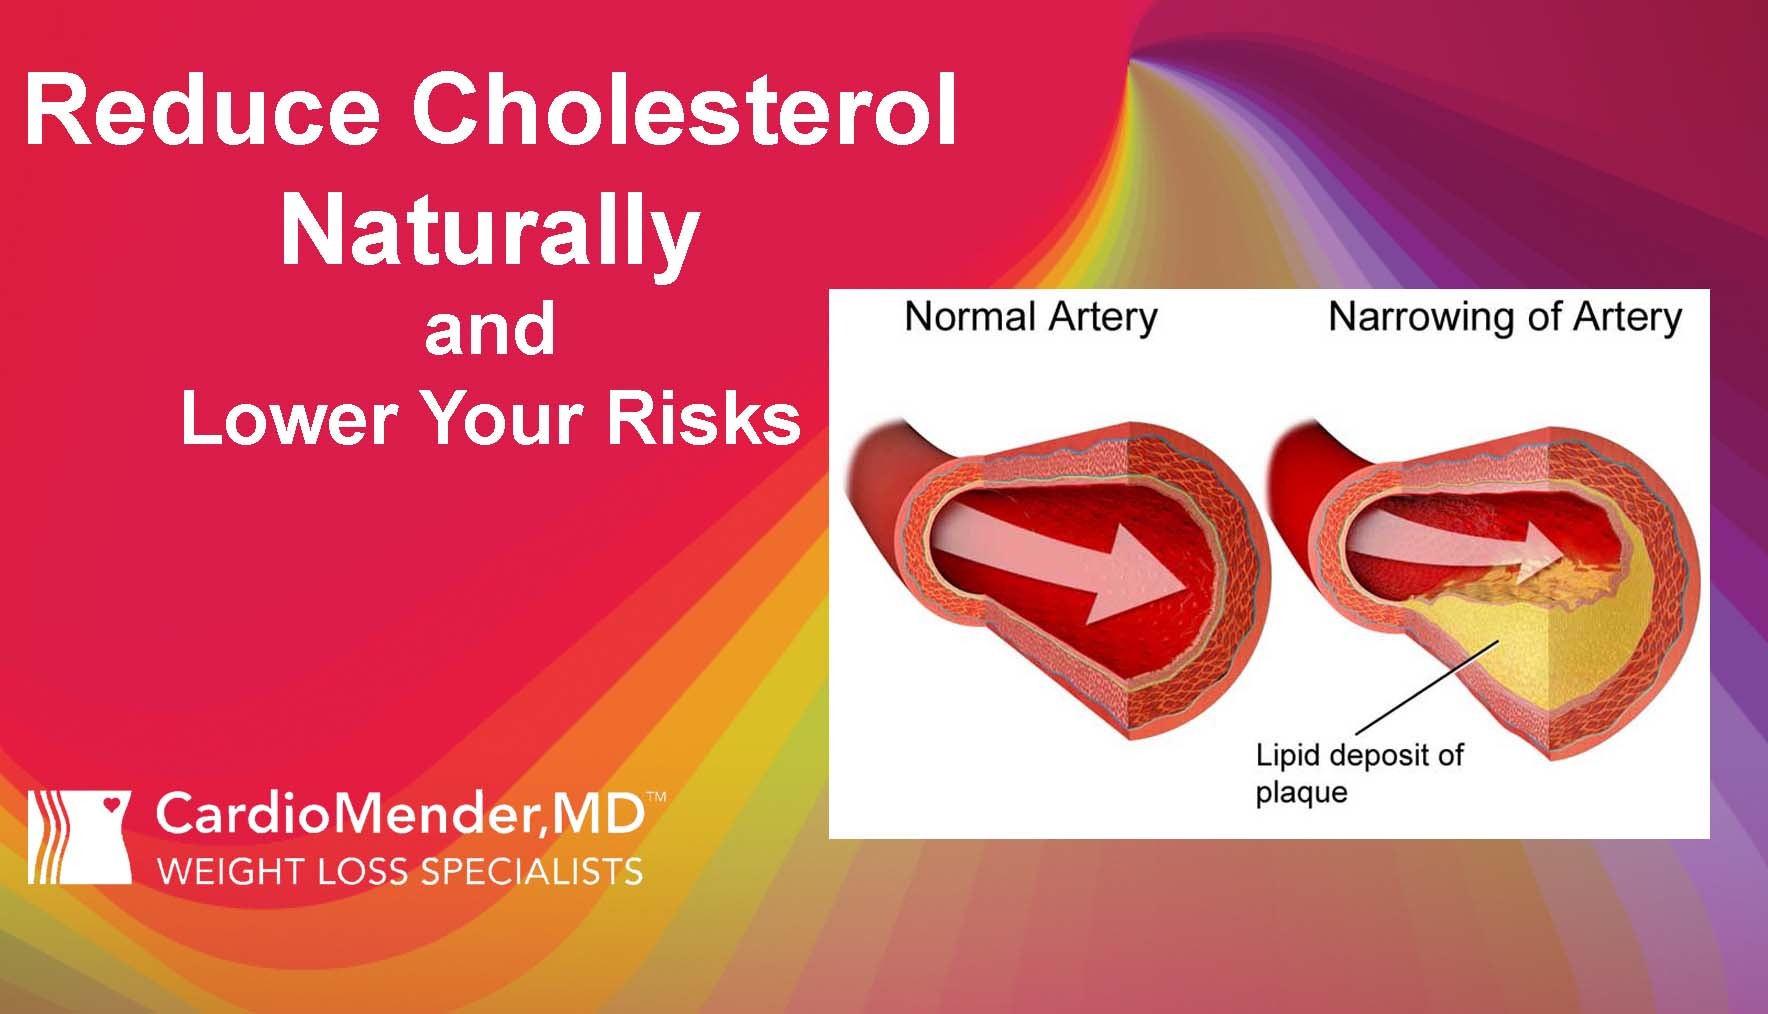 CardioMender, MD reduce cholesterol naturally